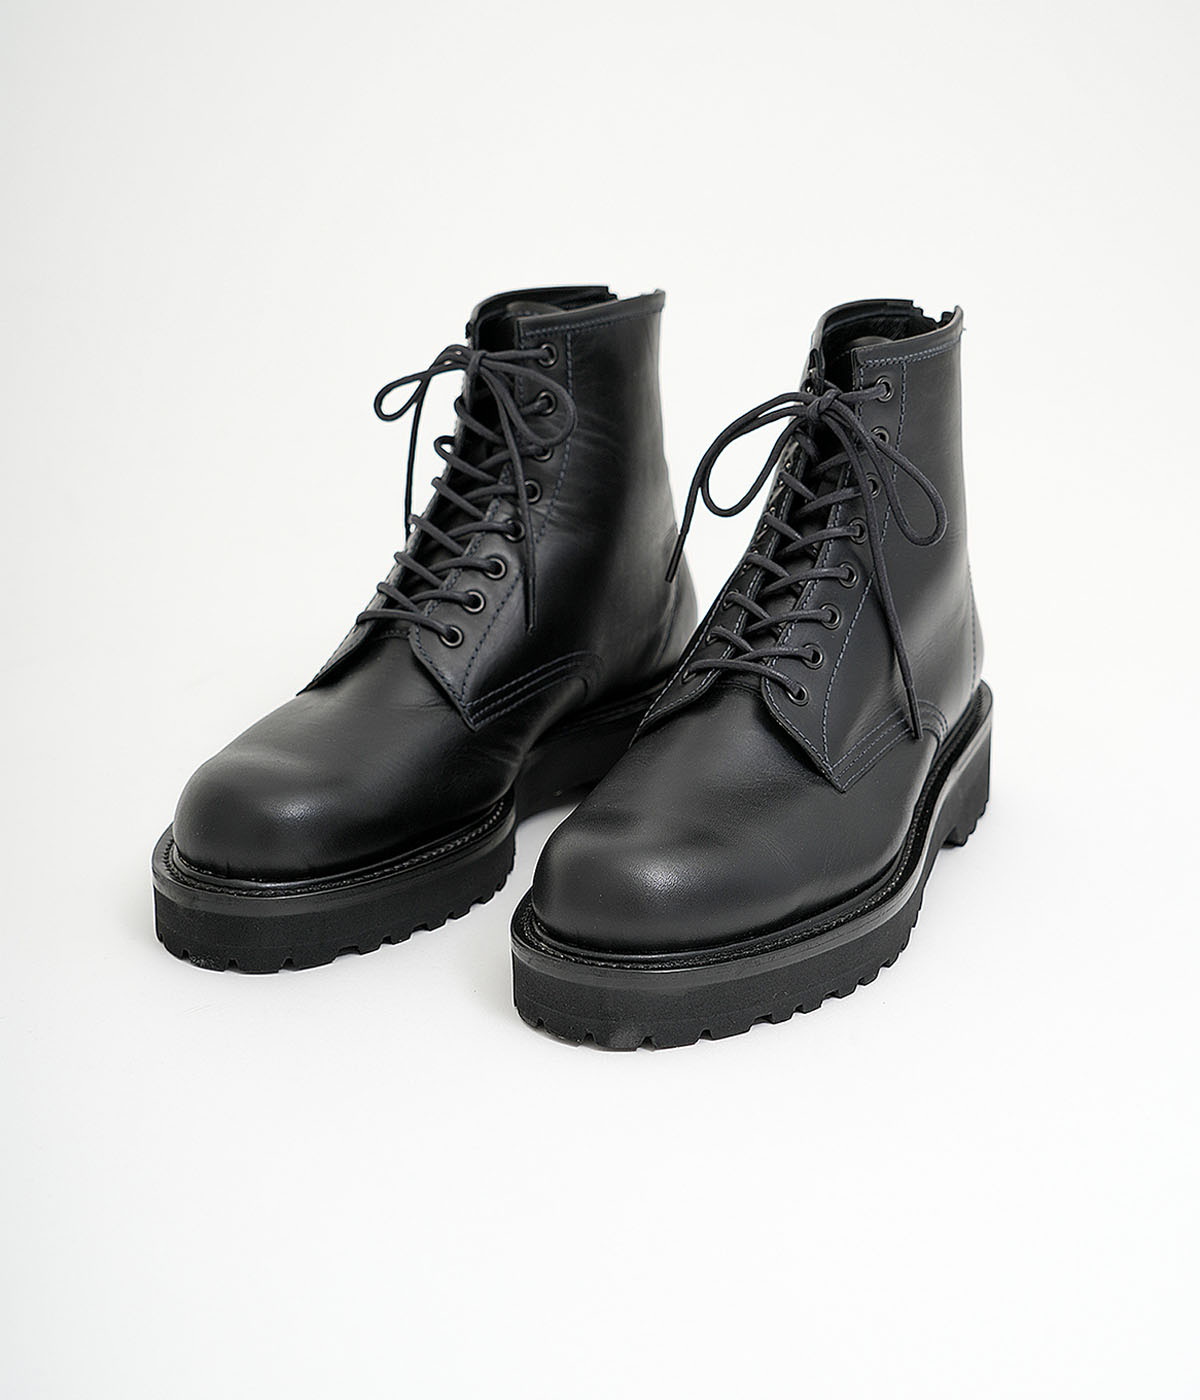 22/AW商品 》 WH × junhashimoto / LIMITED BACK ZIP BOOTS/受注会 